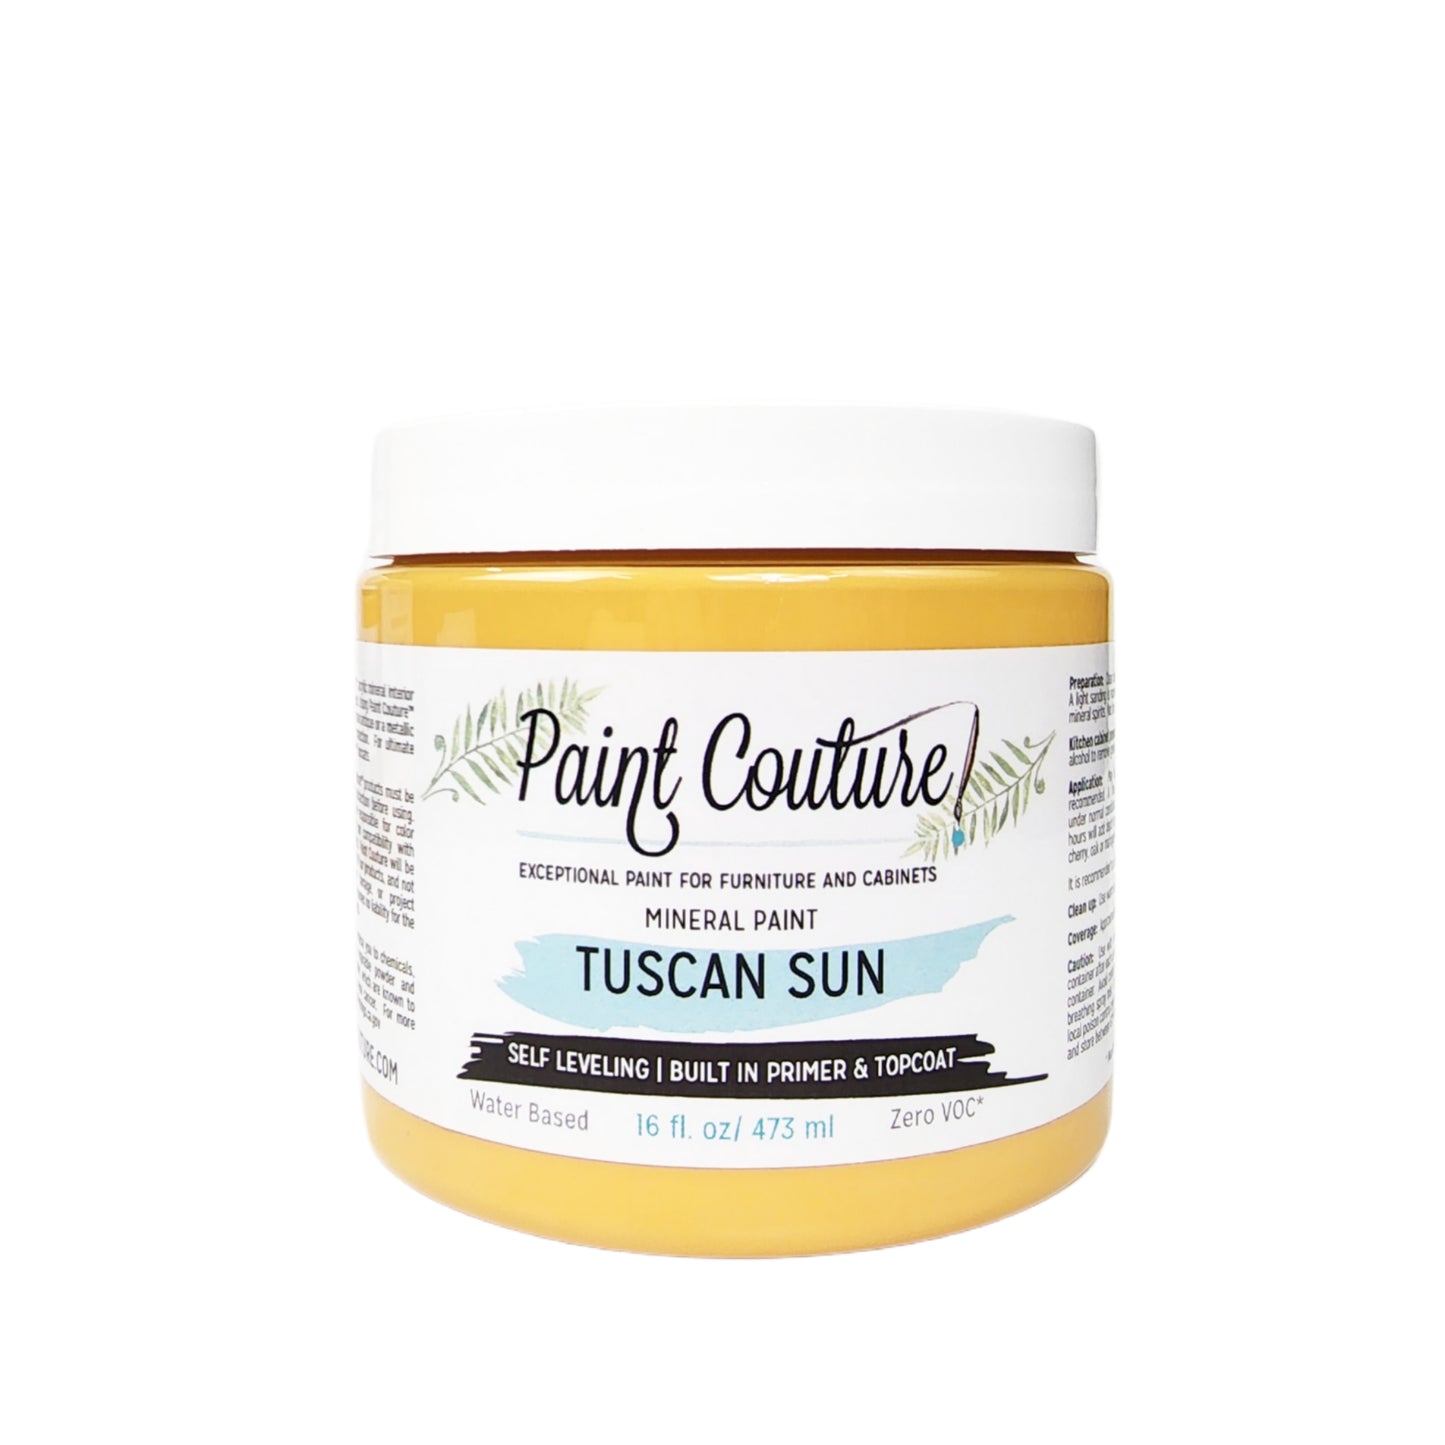 Paint Couture Tuscan Sun